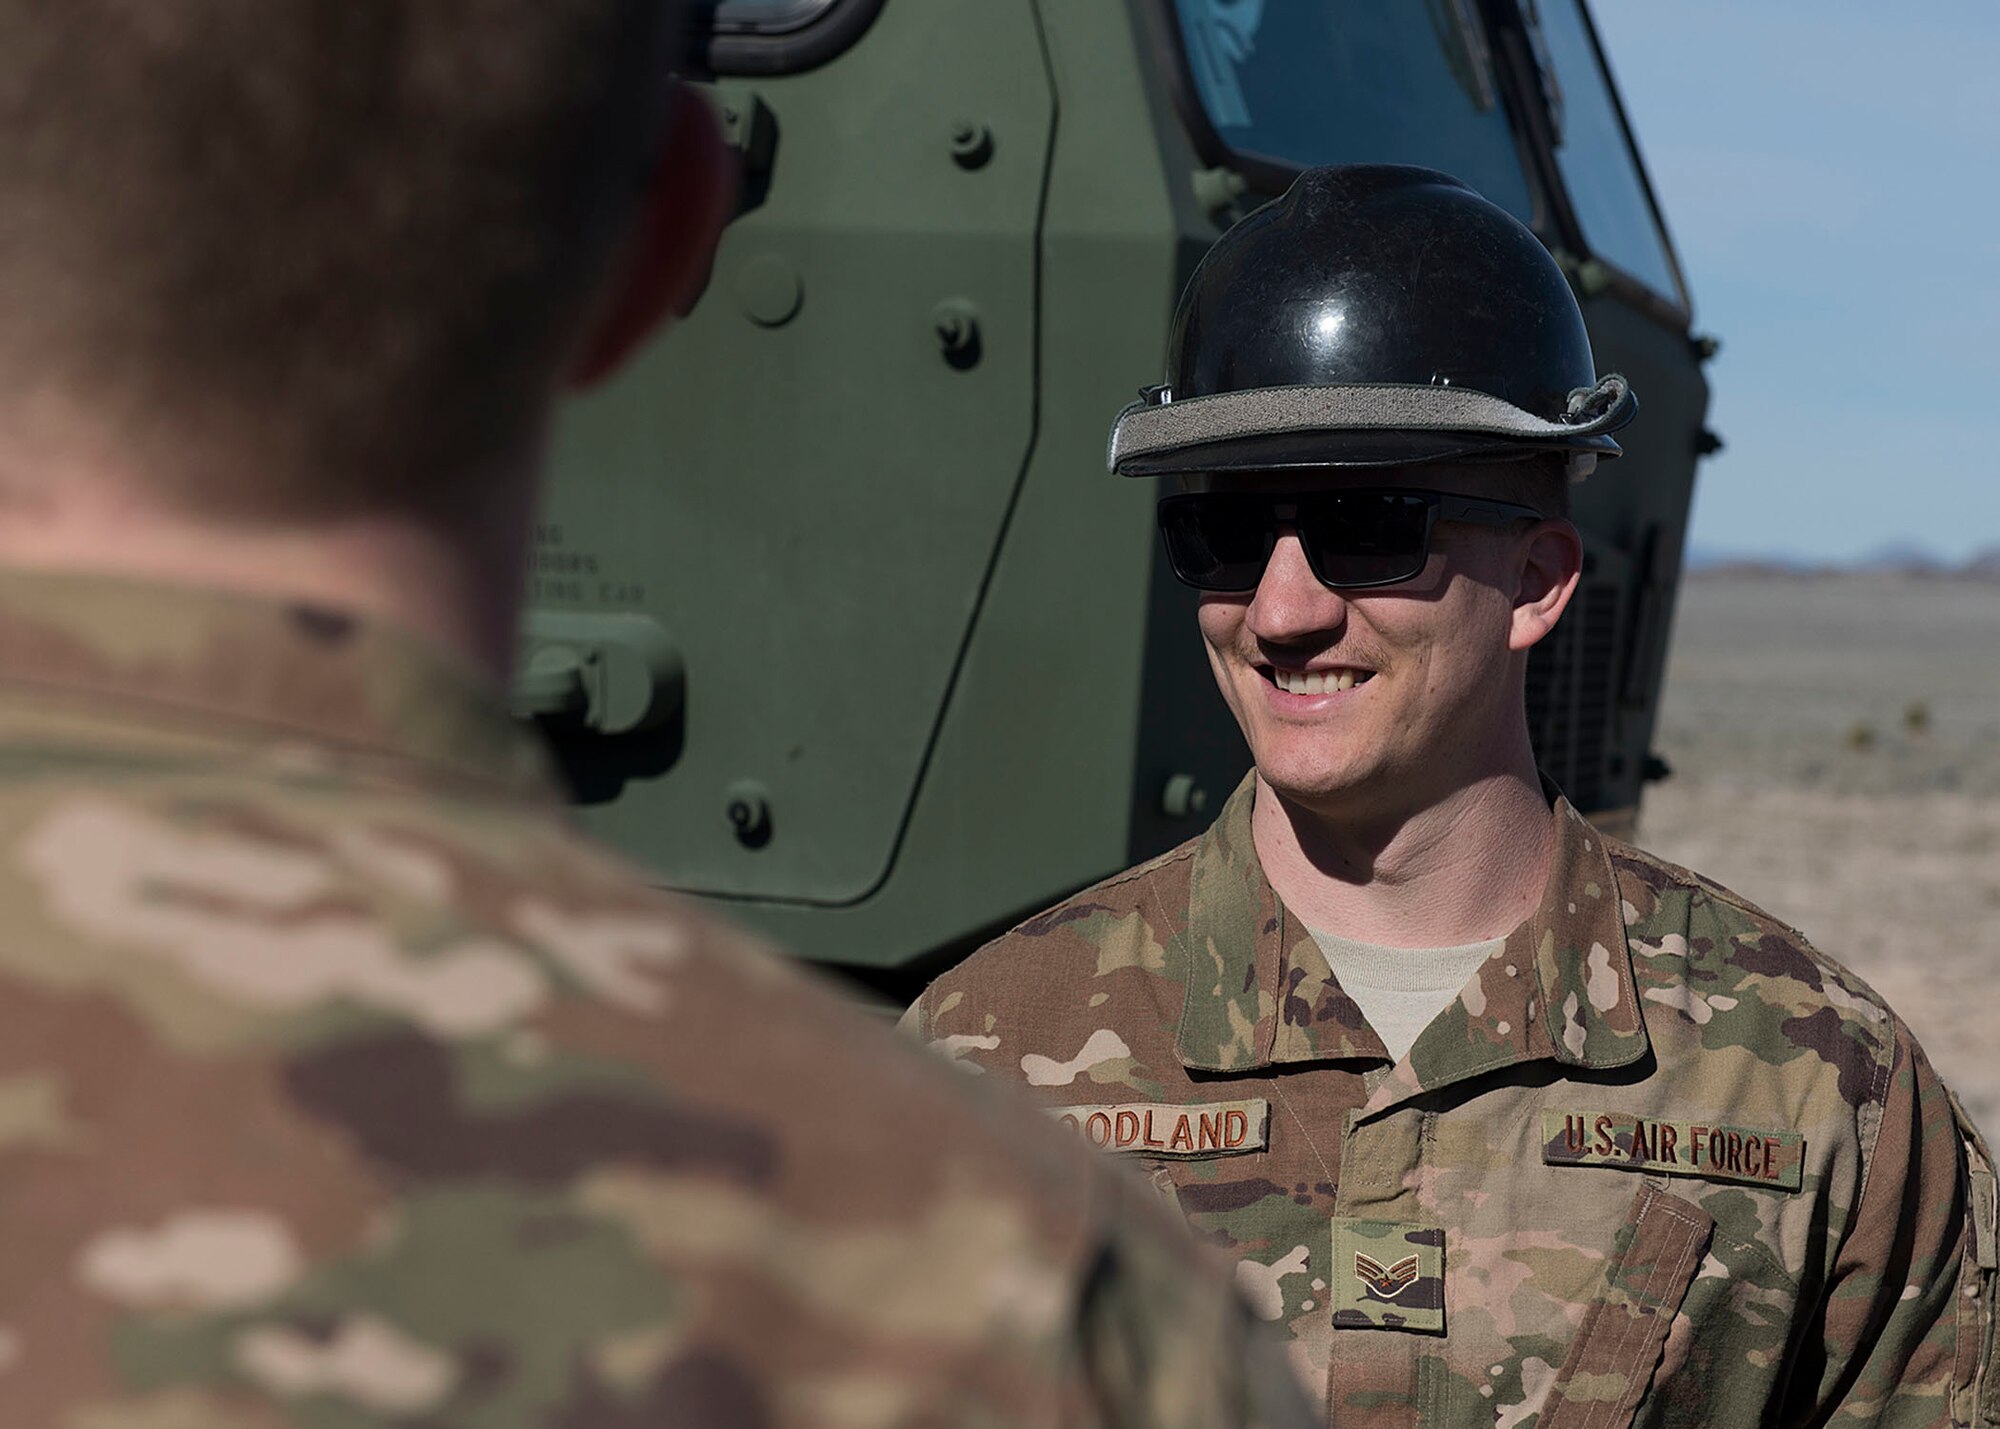 An Airman wears a hardhat while smiling.